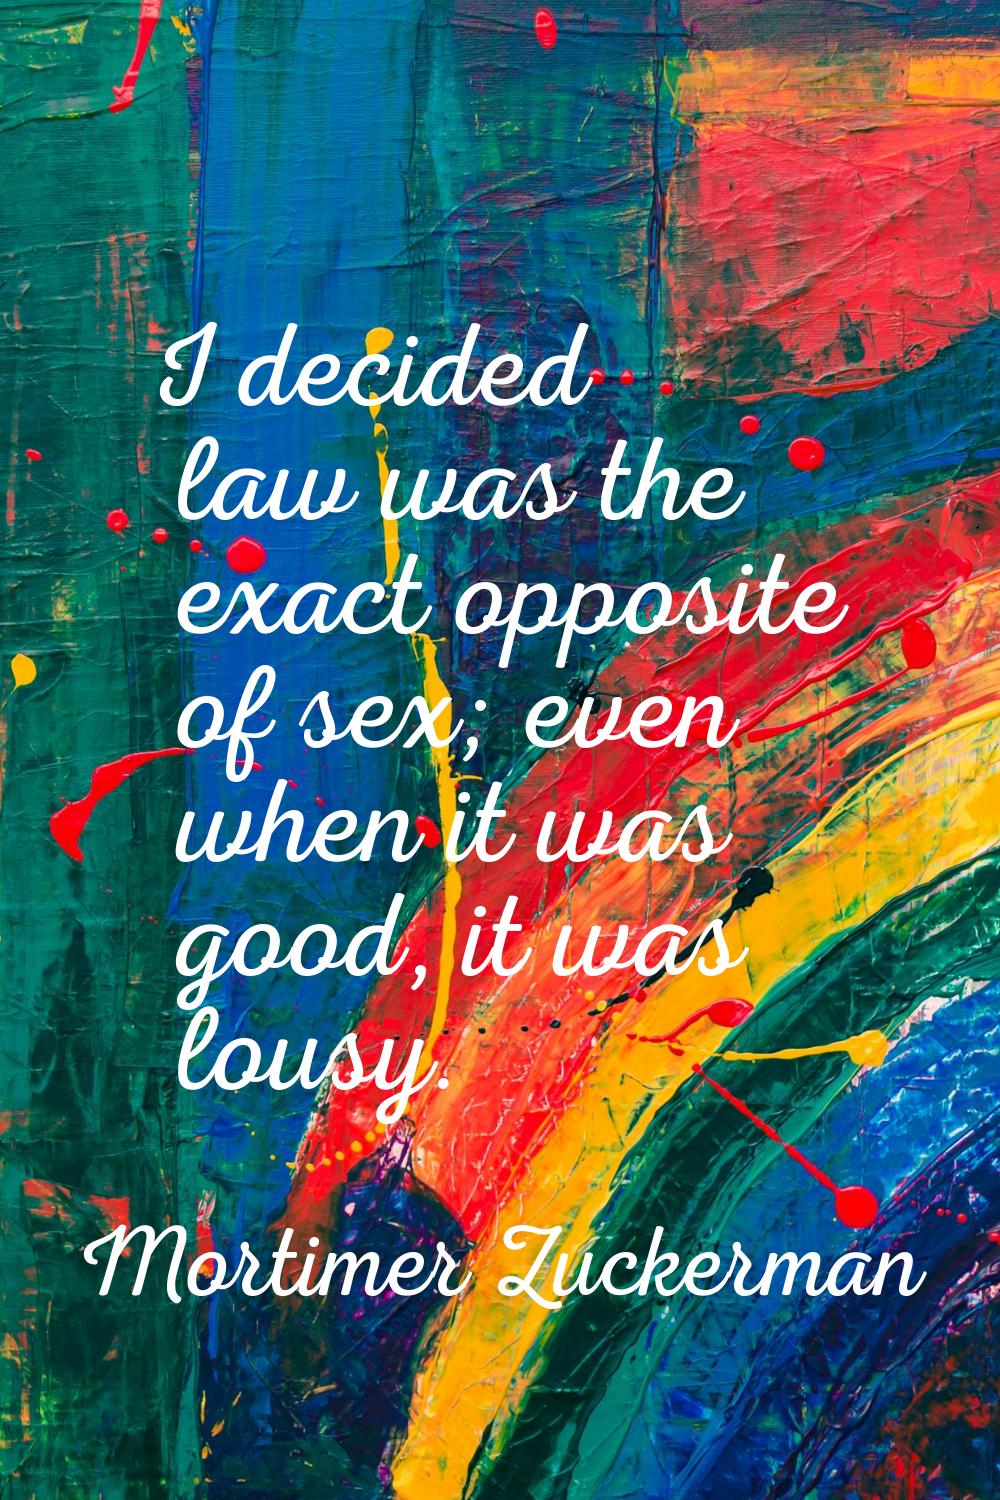 I decided law was the exact opposite of sex; even when it was good, it was lousy.